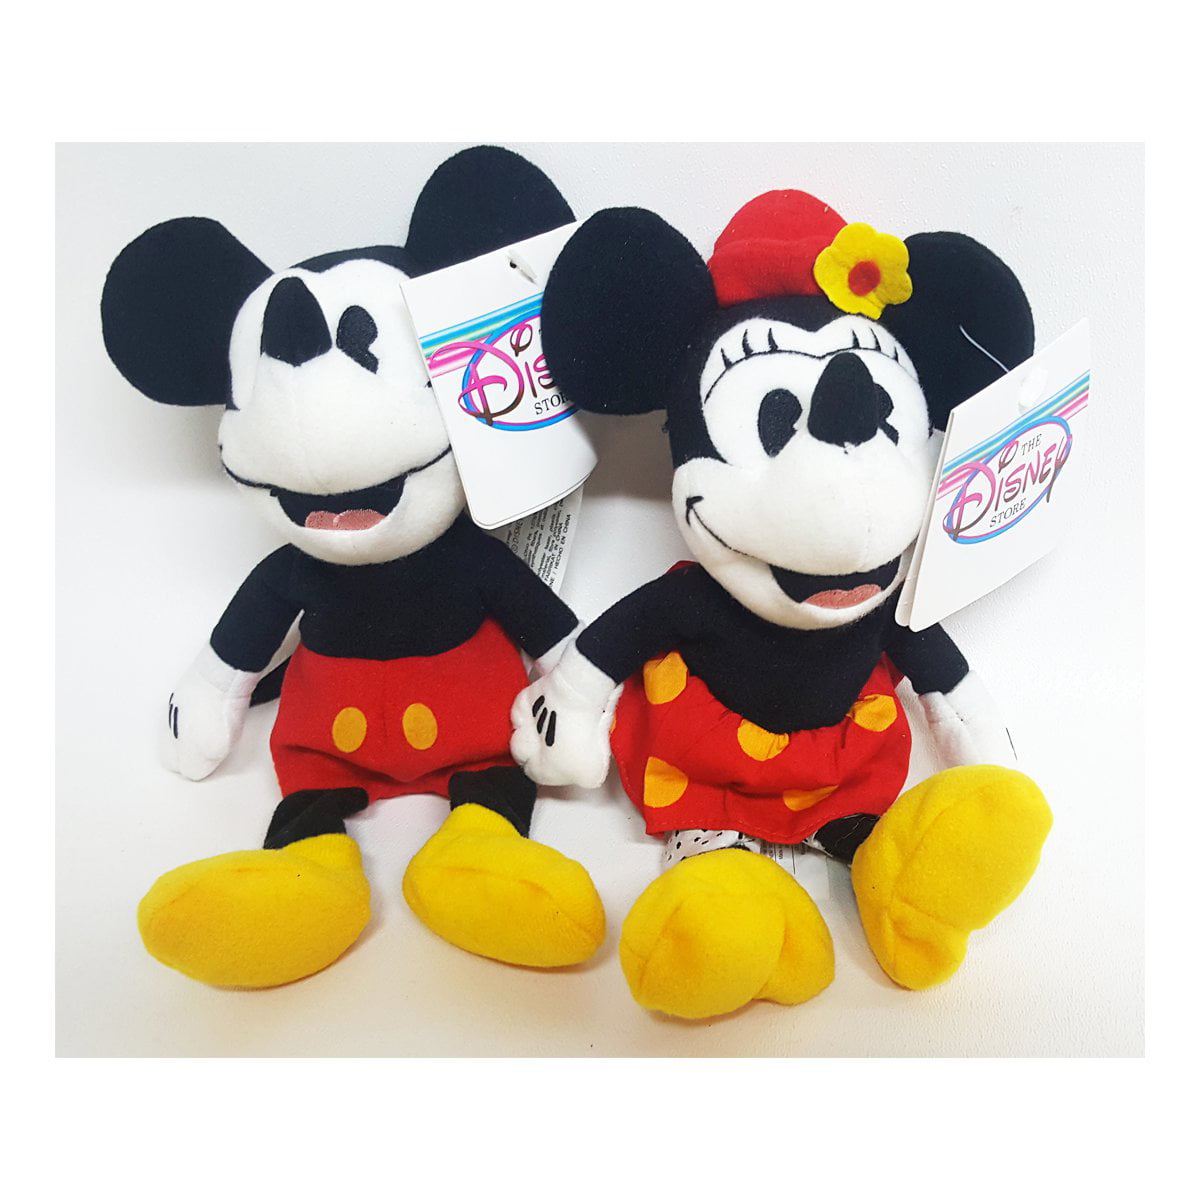 Vintage Disney World Resort Mickey and Minnie Mouse Bean Bag Toys 10